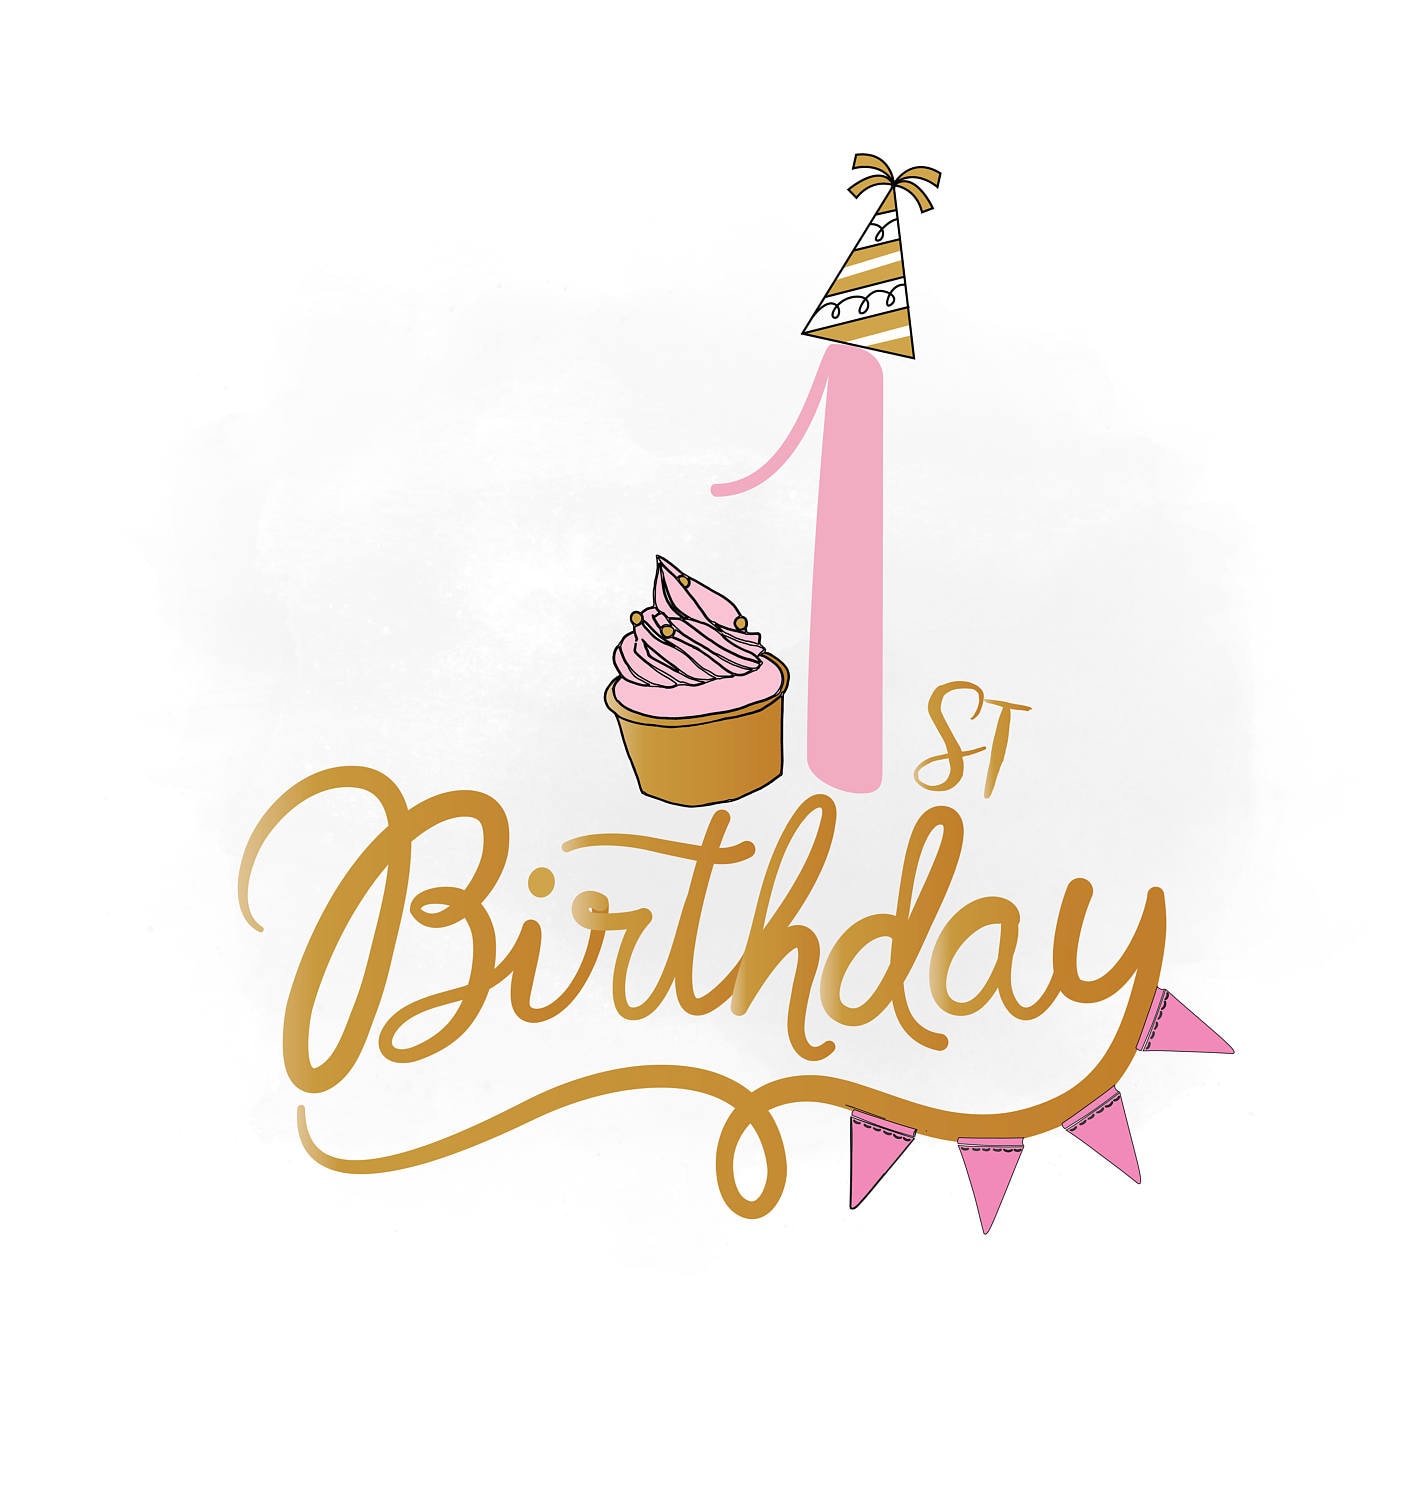 Download 1st Birthday SVG clipart, baby girl Birthday Quote ...